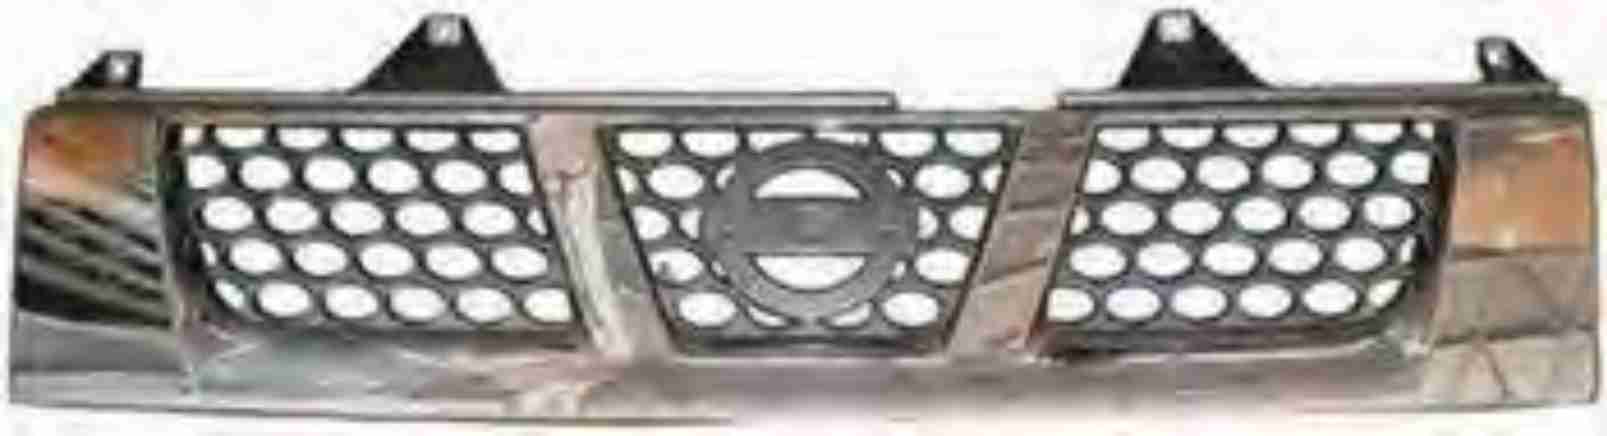 GRI502138 - FRONTIER 01-05 GRILLE CHROME & GREY...2005759